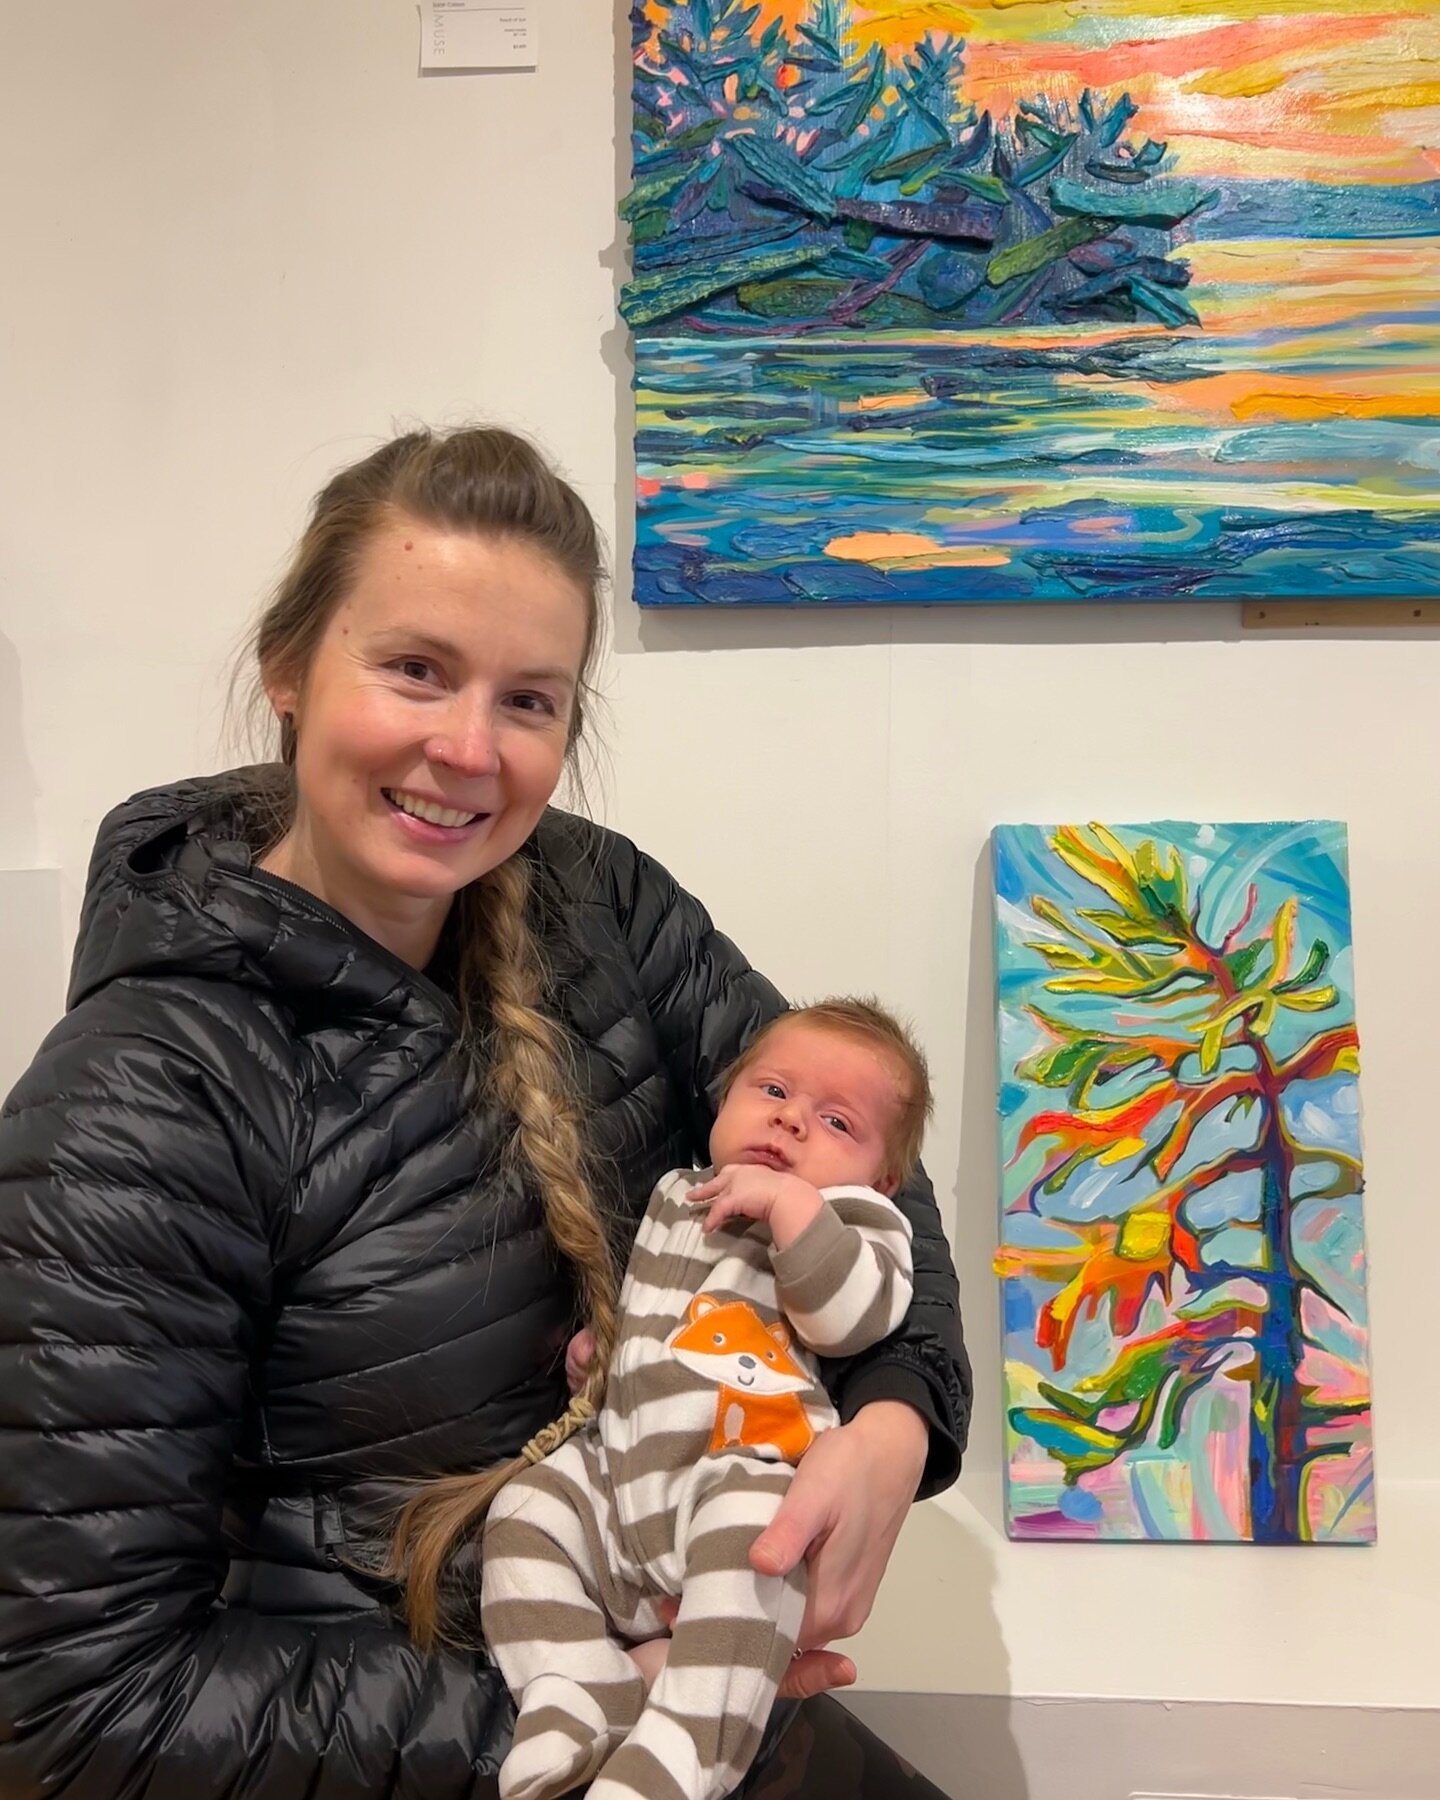 Throwback to Lynden&rsquo;s first gallery visit at 5 weeks (back when he had hair!). We dropped of 𝙇𝙞𝙩𝙩𝙡𝙚 𝙋𝙞𝙣𝙚 which has has since found its home through @musegallery_toronto 
Behind us is 𝙏𝙤𝙪𝙘𝙝 𝙤𝙛 𝙎𝙪𝙣, a 36&rdquo; x 60&rdquo; oil